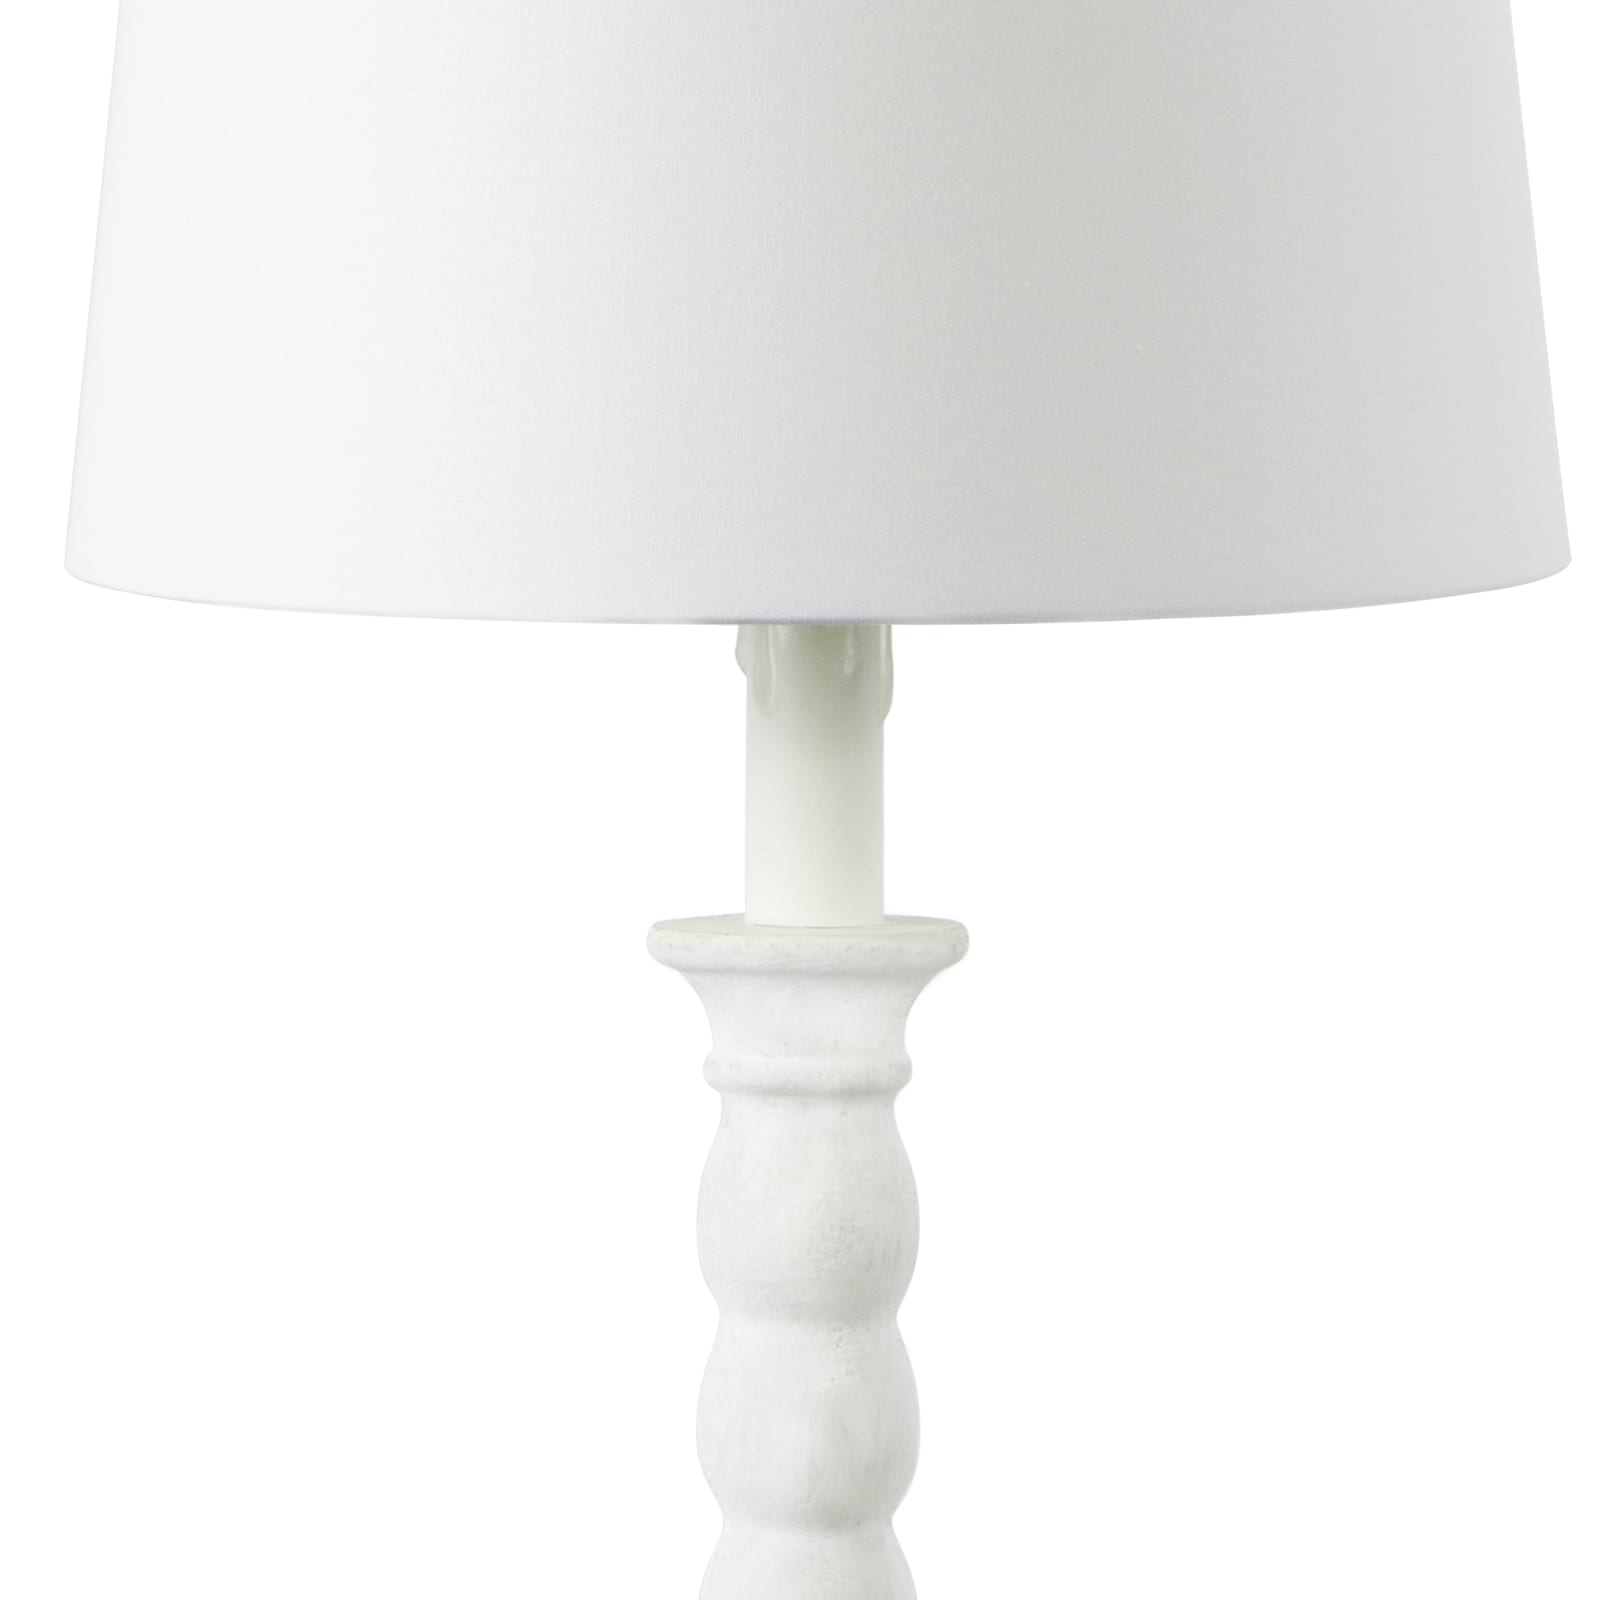 Perennial Buffet Lamp in White by Coastal Living